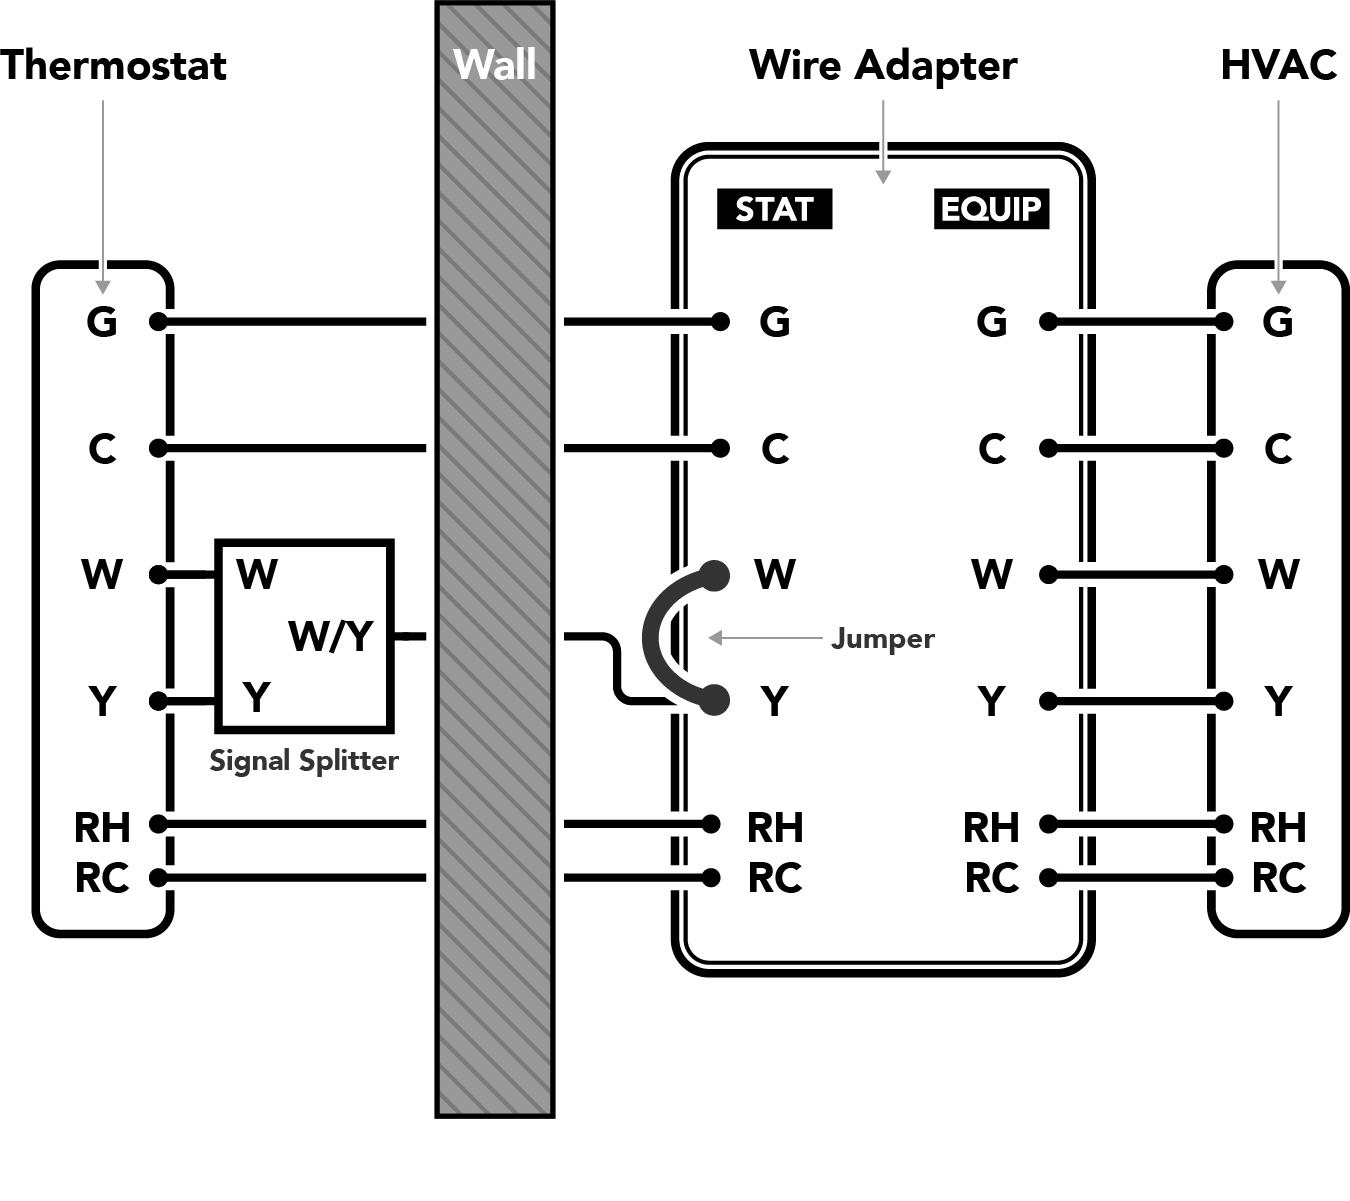 Diagram-02_Conventional-Heat-and-AC_5-Wires_2015-11-17_V3_Conventional_Heat-and-AC_4-Wires_copy_2.jpg